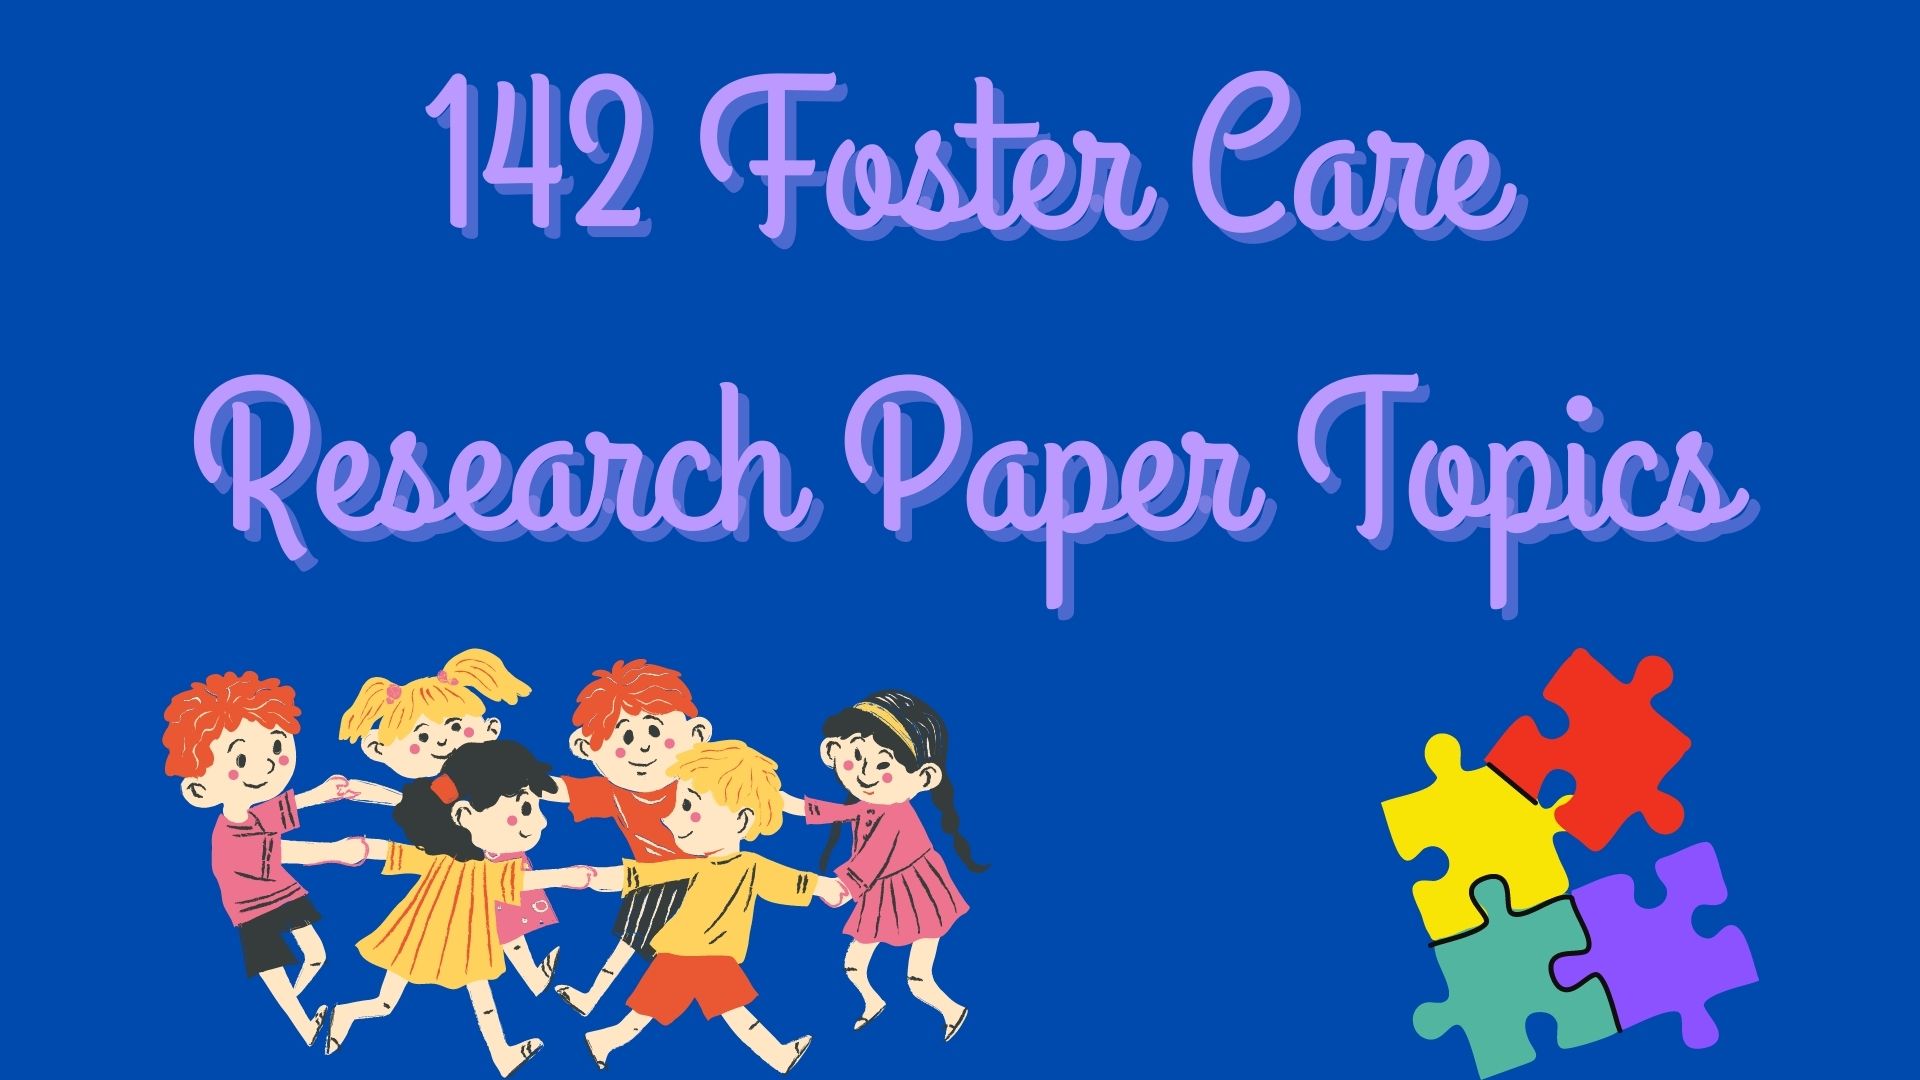 142 Foster Care Research Paper Topics